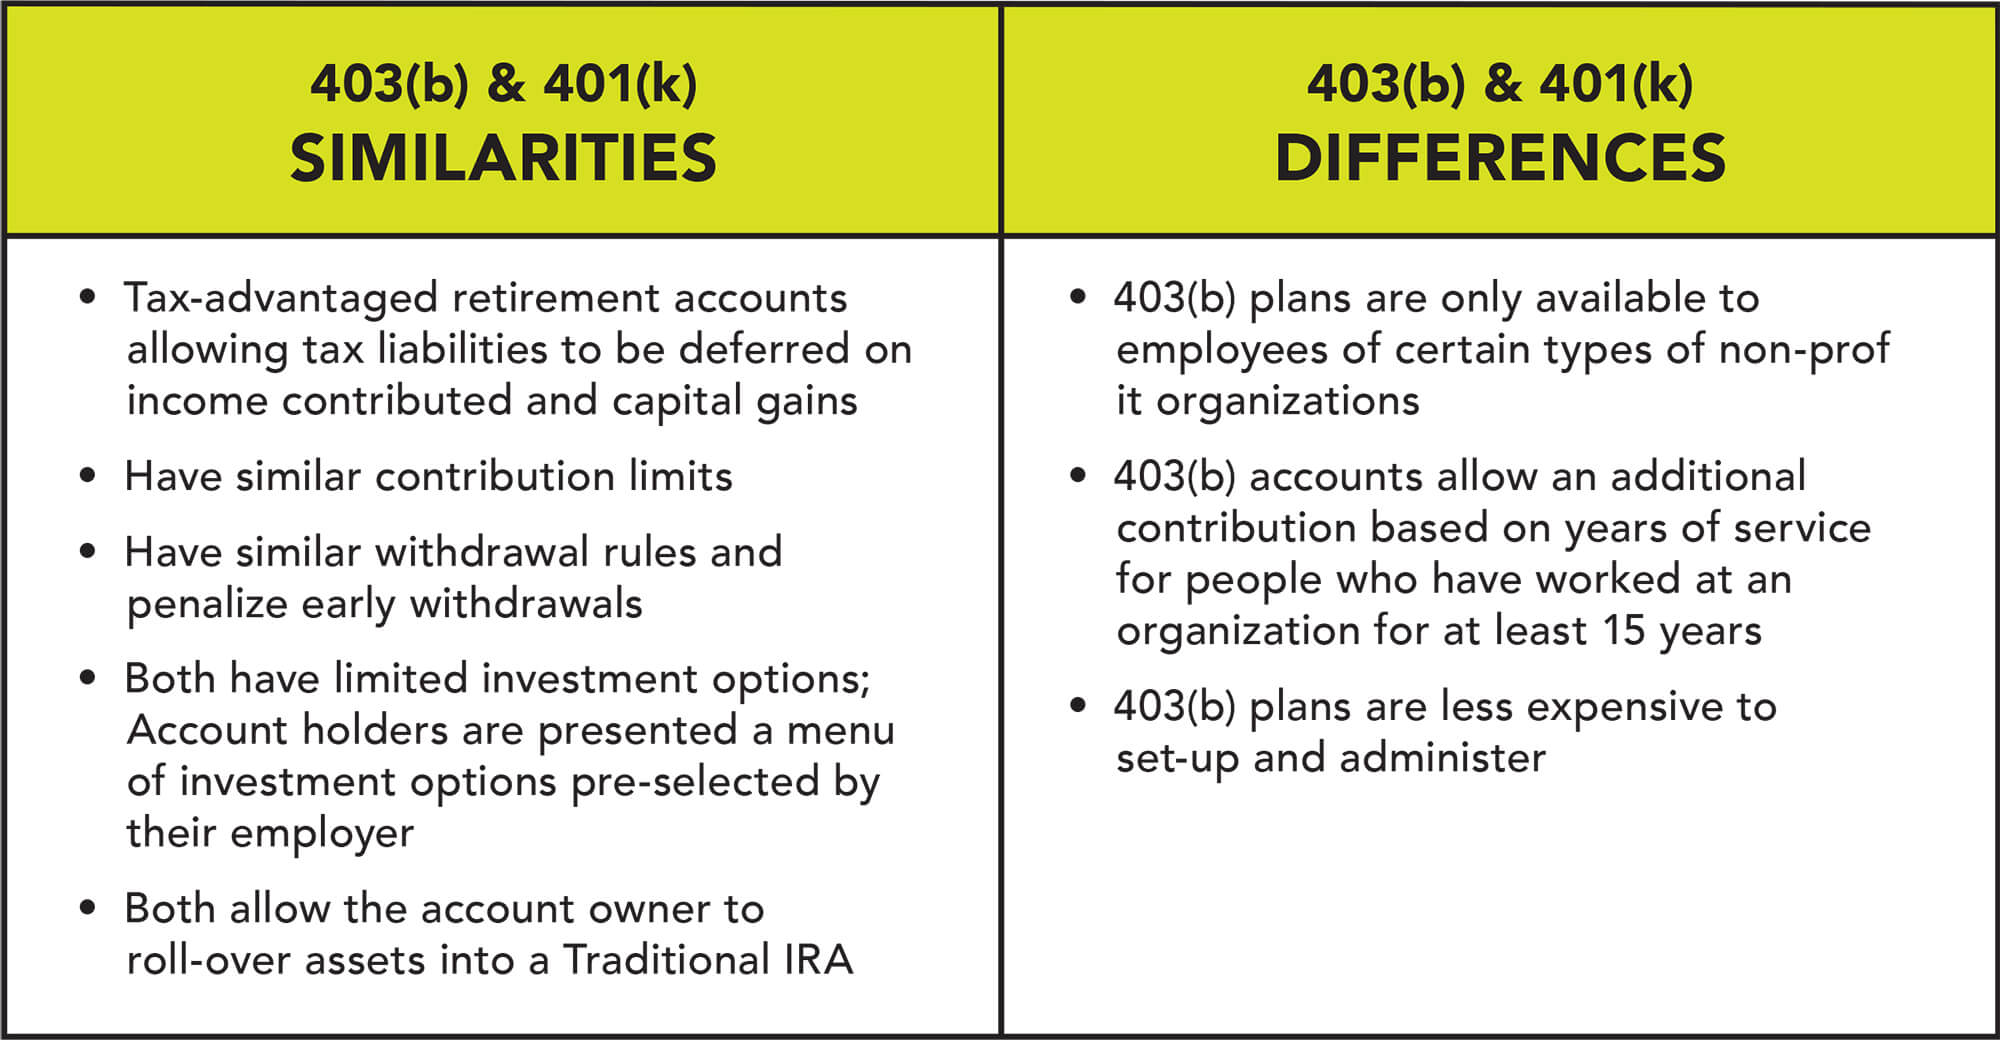 A 403(b) account is similar to a 401(k) but has some additional benefits.